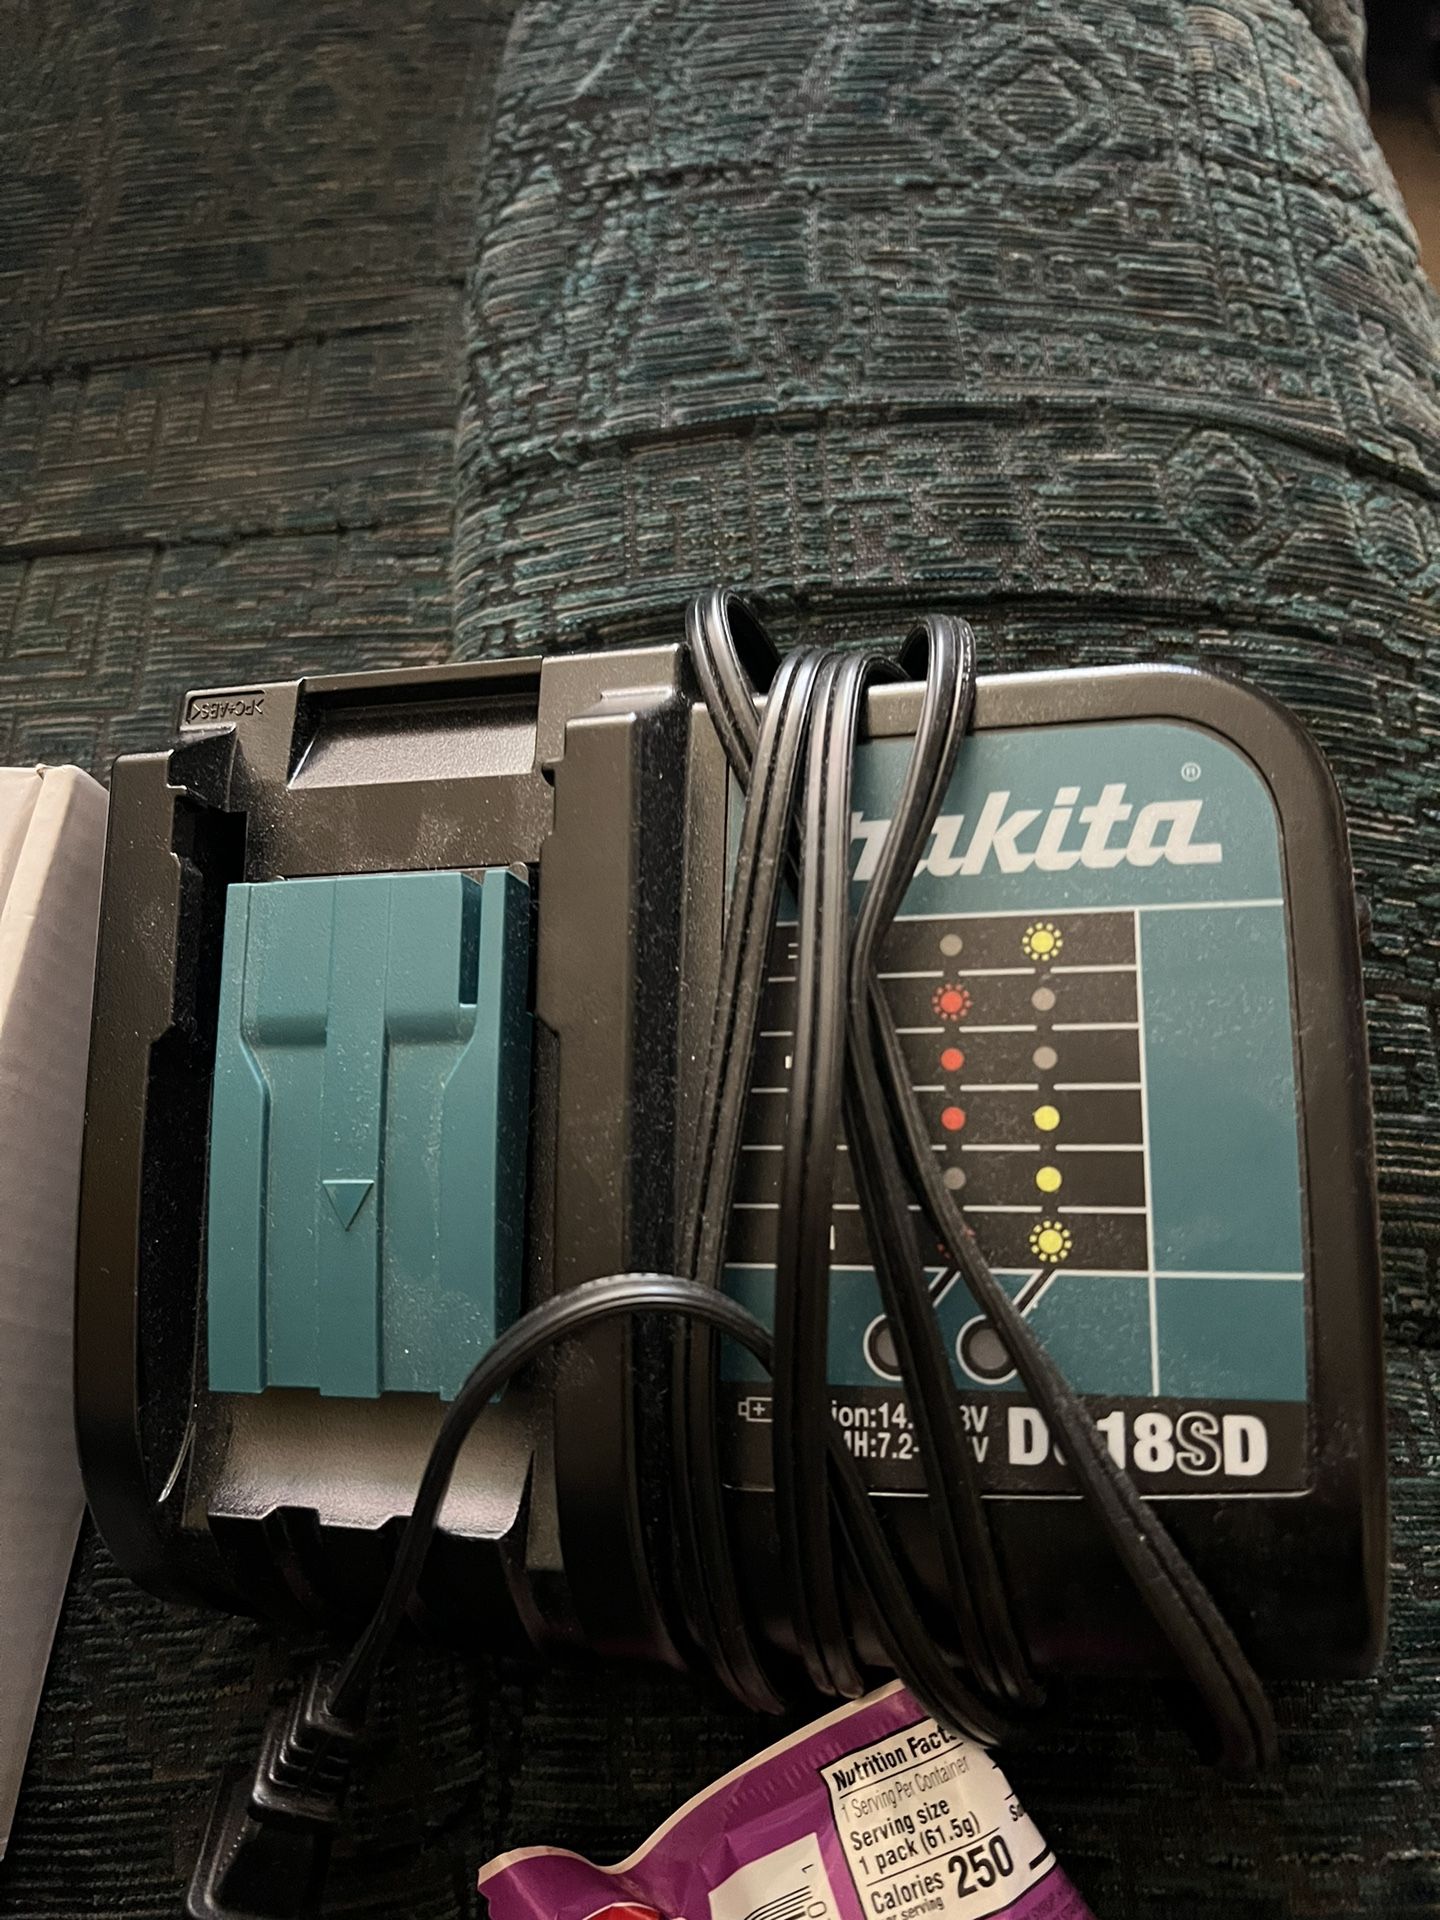 Thakita Drill Battery Charger